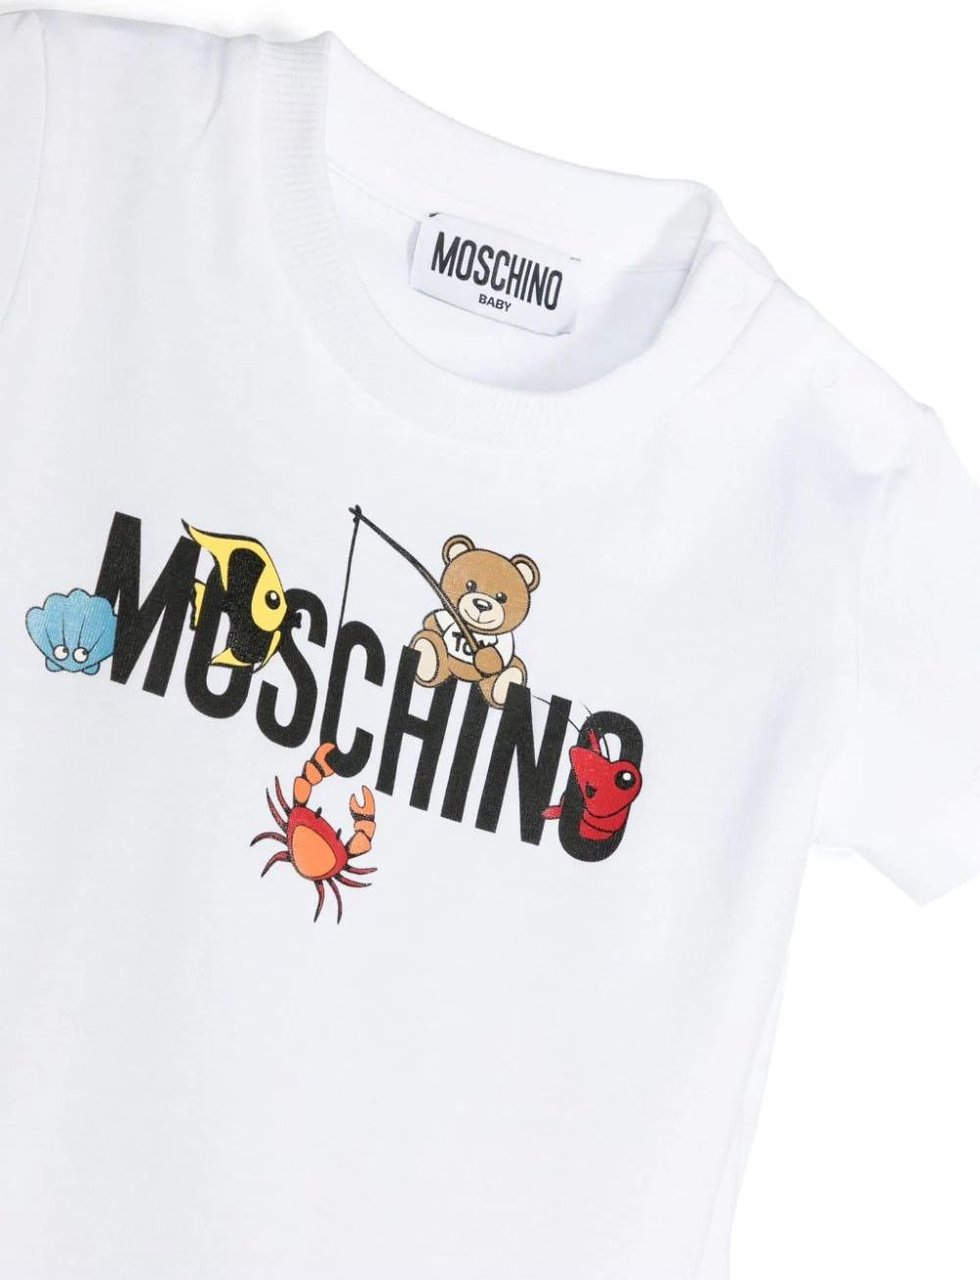 Moschino dress divers Divers